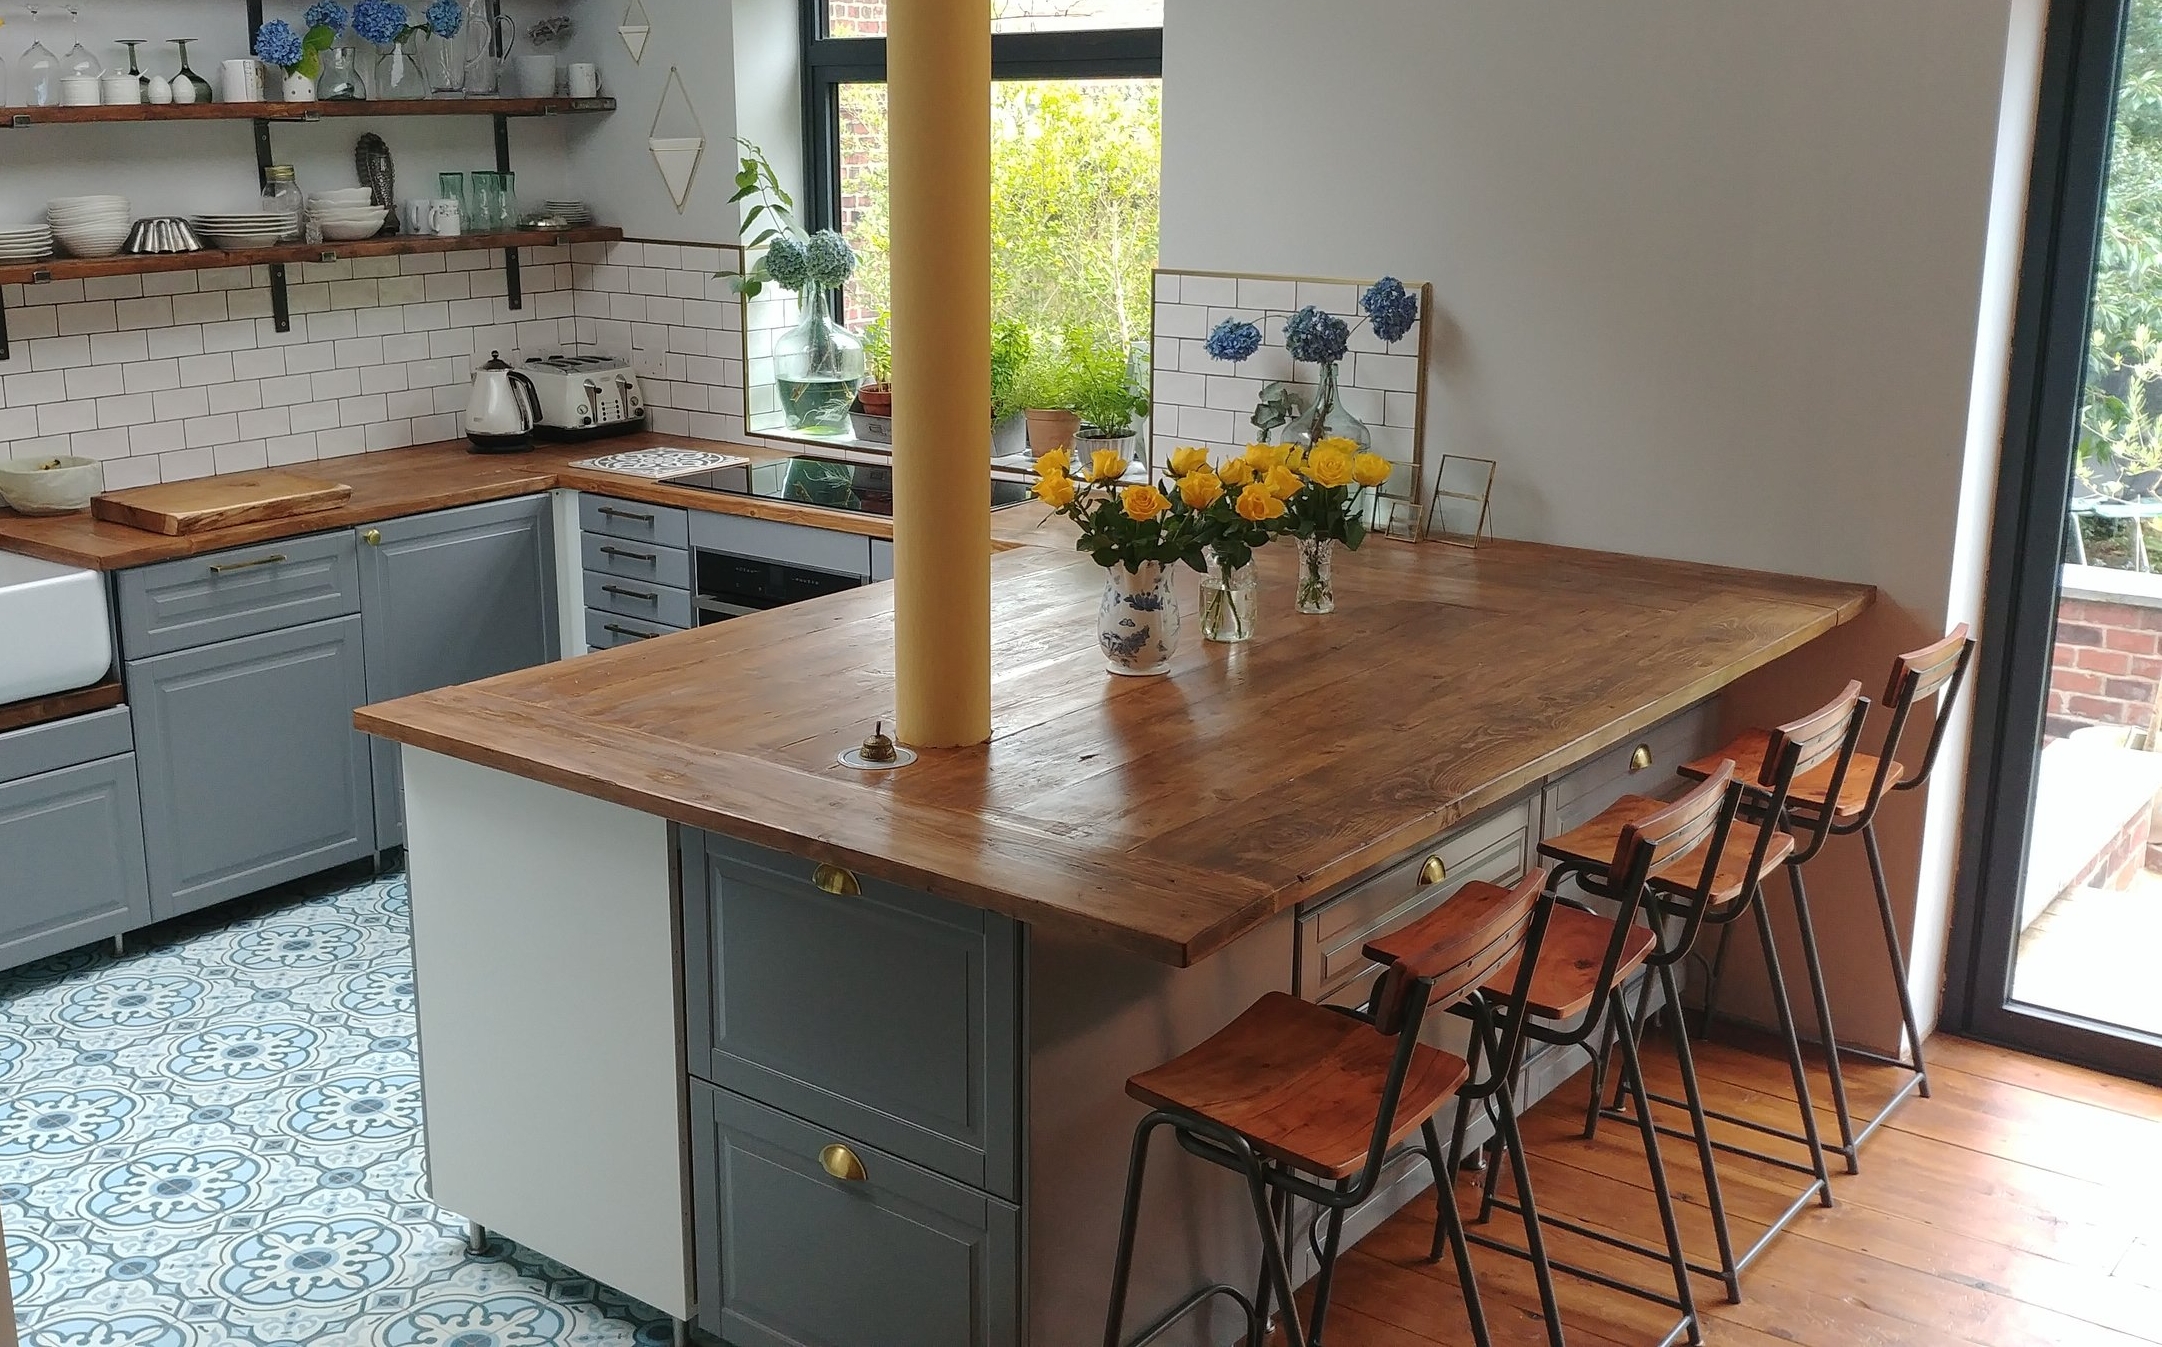 Hints And Tips For How To Diy Install An Ikea Kitchen Alice De